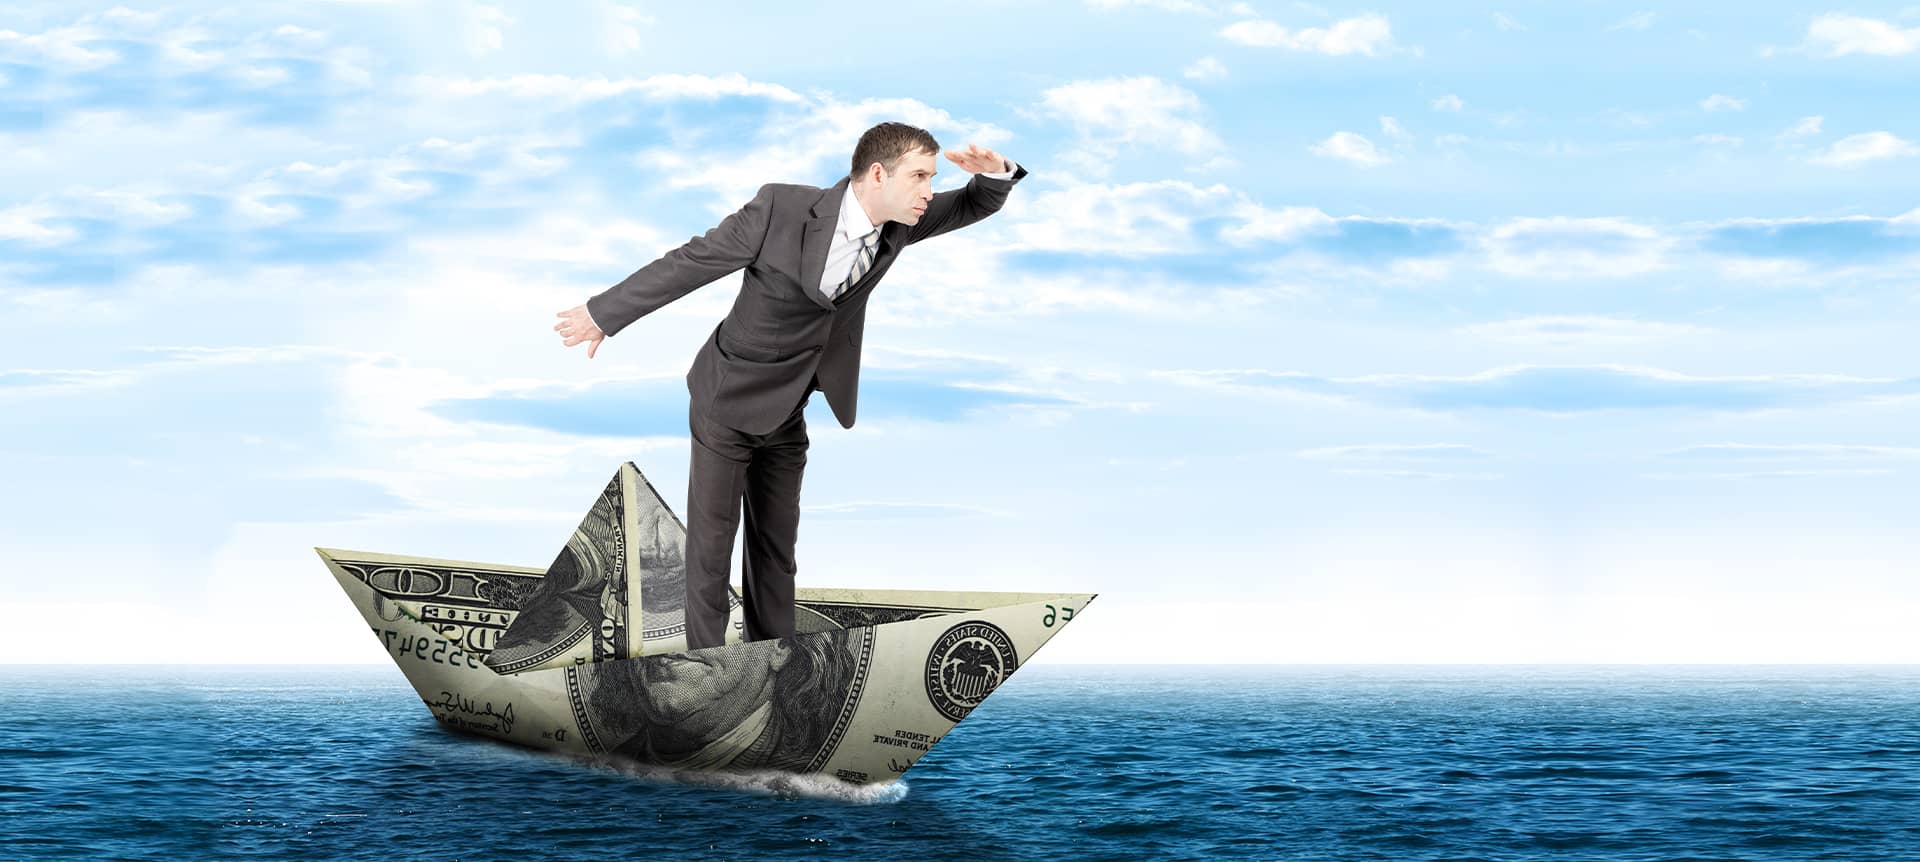 A recruiter on a boat looking for ways cut back on recruitment costs with a hiring platform